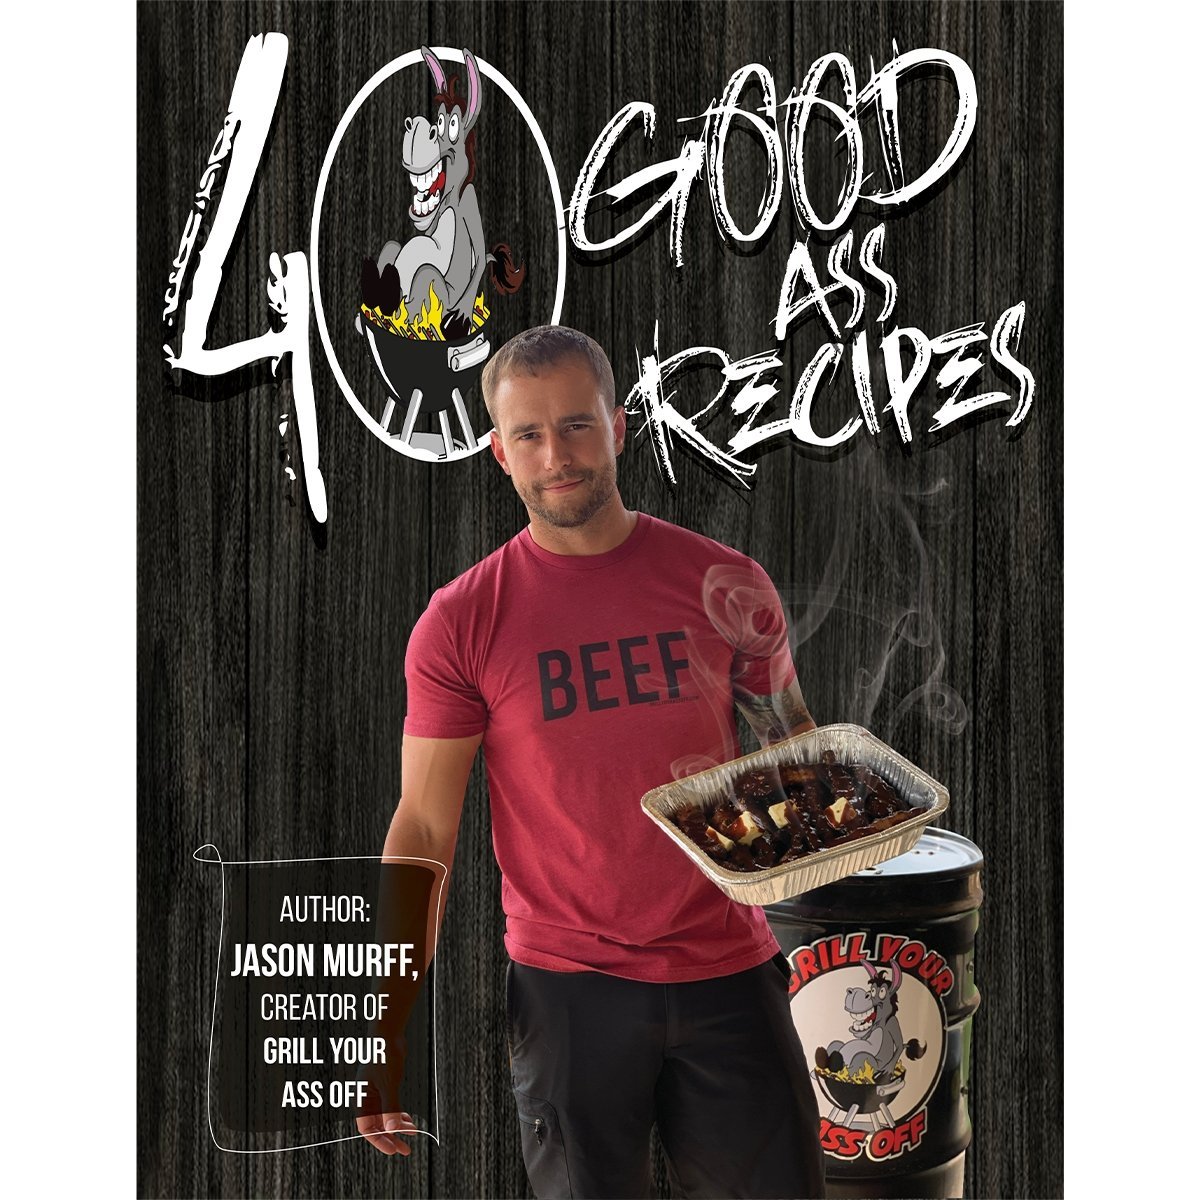 40 Good Ass Recipes™ - The Tool Store